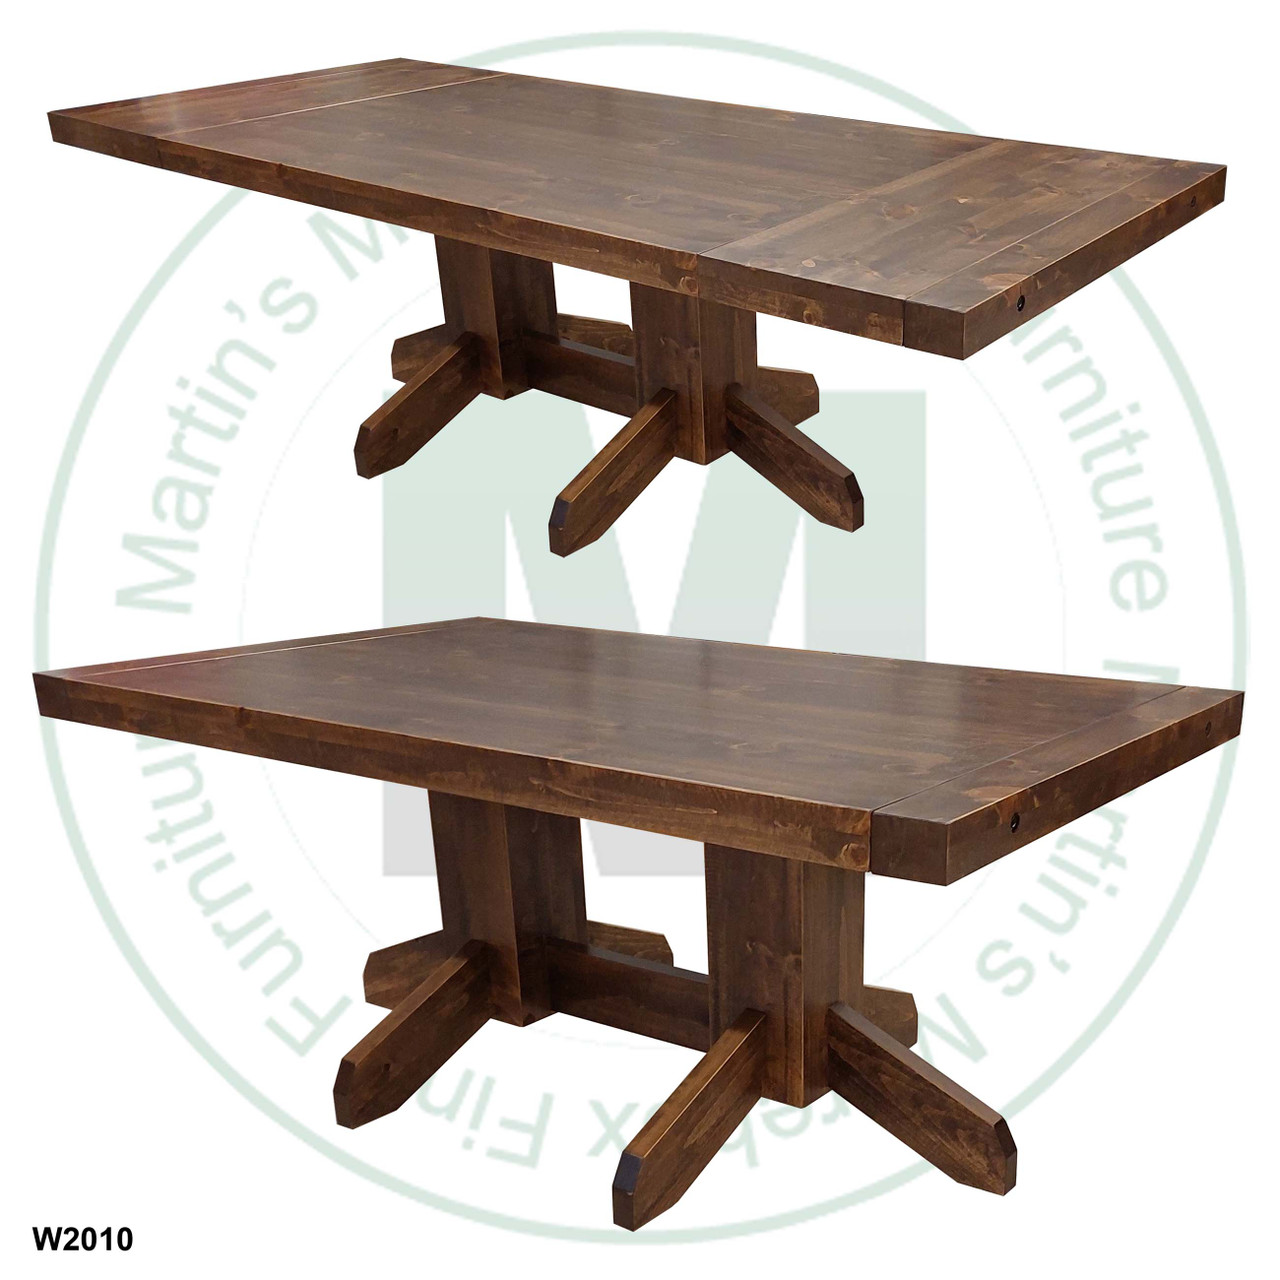 Maple Yukon Solid Top Double Pedestal Table 48'' Deep x 96'' Wide x 30'' High With 2 - 16'' End Leaves